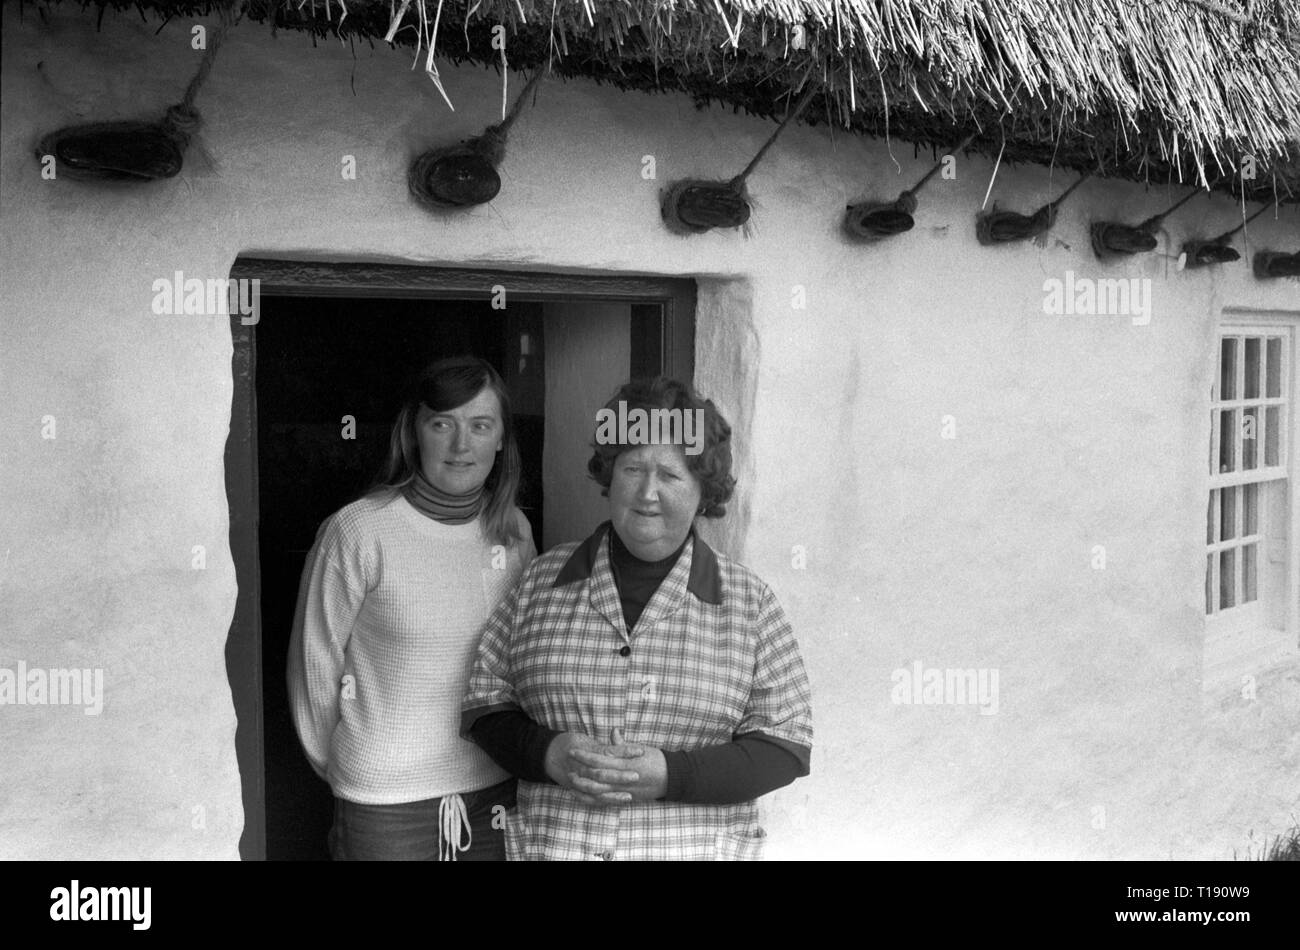 Isle of Man, 1970s. Mother and daughter living in a traditional stone thatched Long House Longhouse 1978. HOMER SYKES Stock Photo